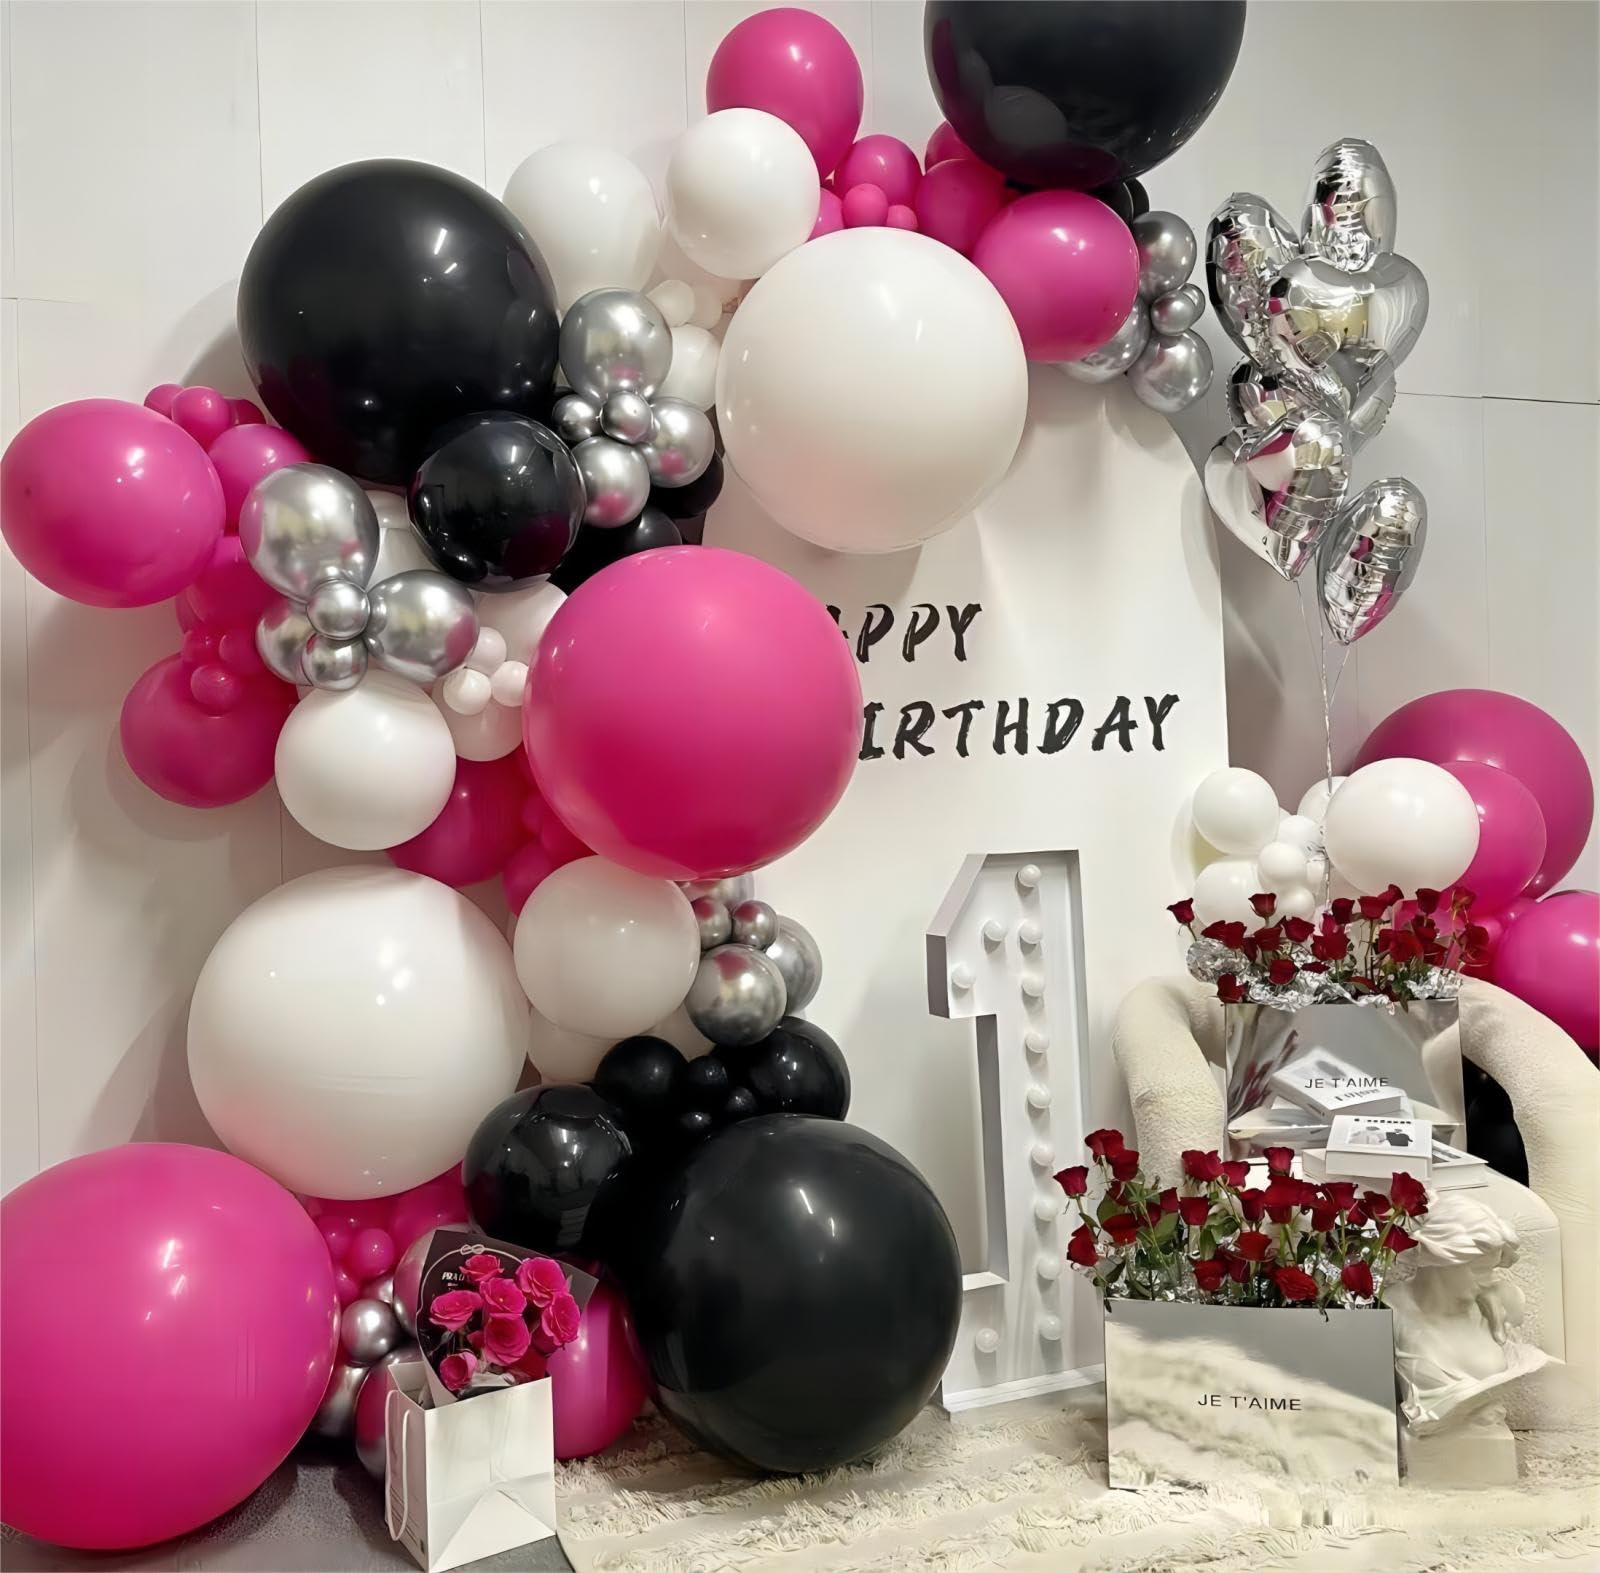 130pcs Hot Pink Balloons Garlands Kit, 18" 12" 10" 5" Different Sizes Pack Pink Latex Balloon Arch for Birthday Baby Shower Wedding Gender Reveal Party Decorations(With 2 Ribbons)